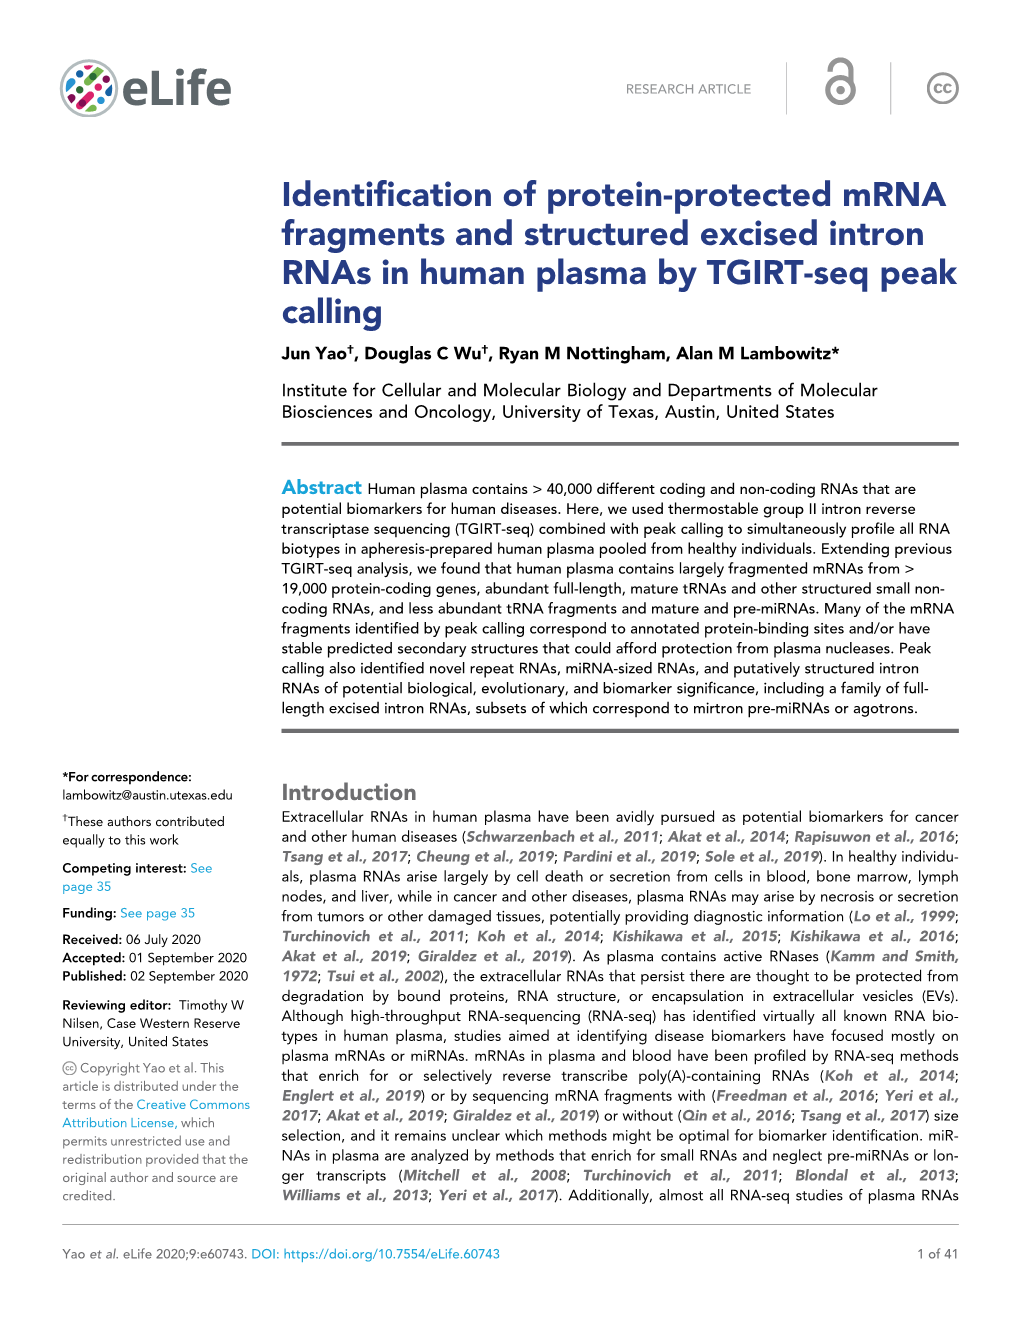 Identification of Protein-Protected Mrna Fragments and Structured